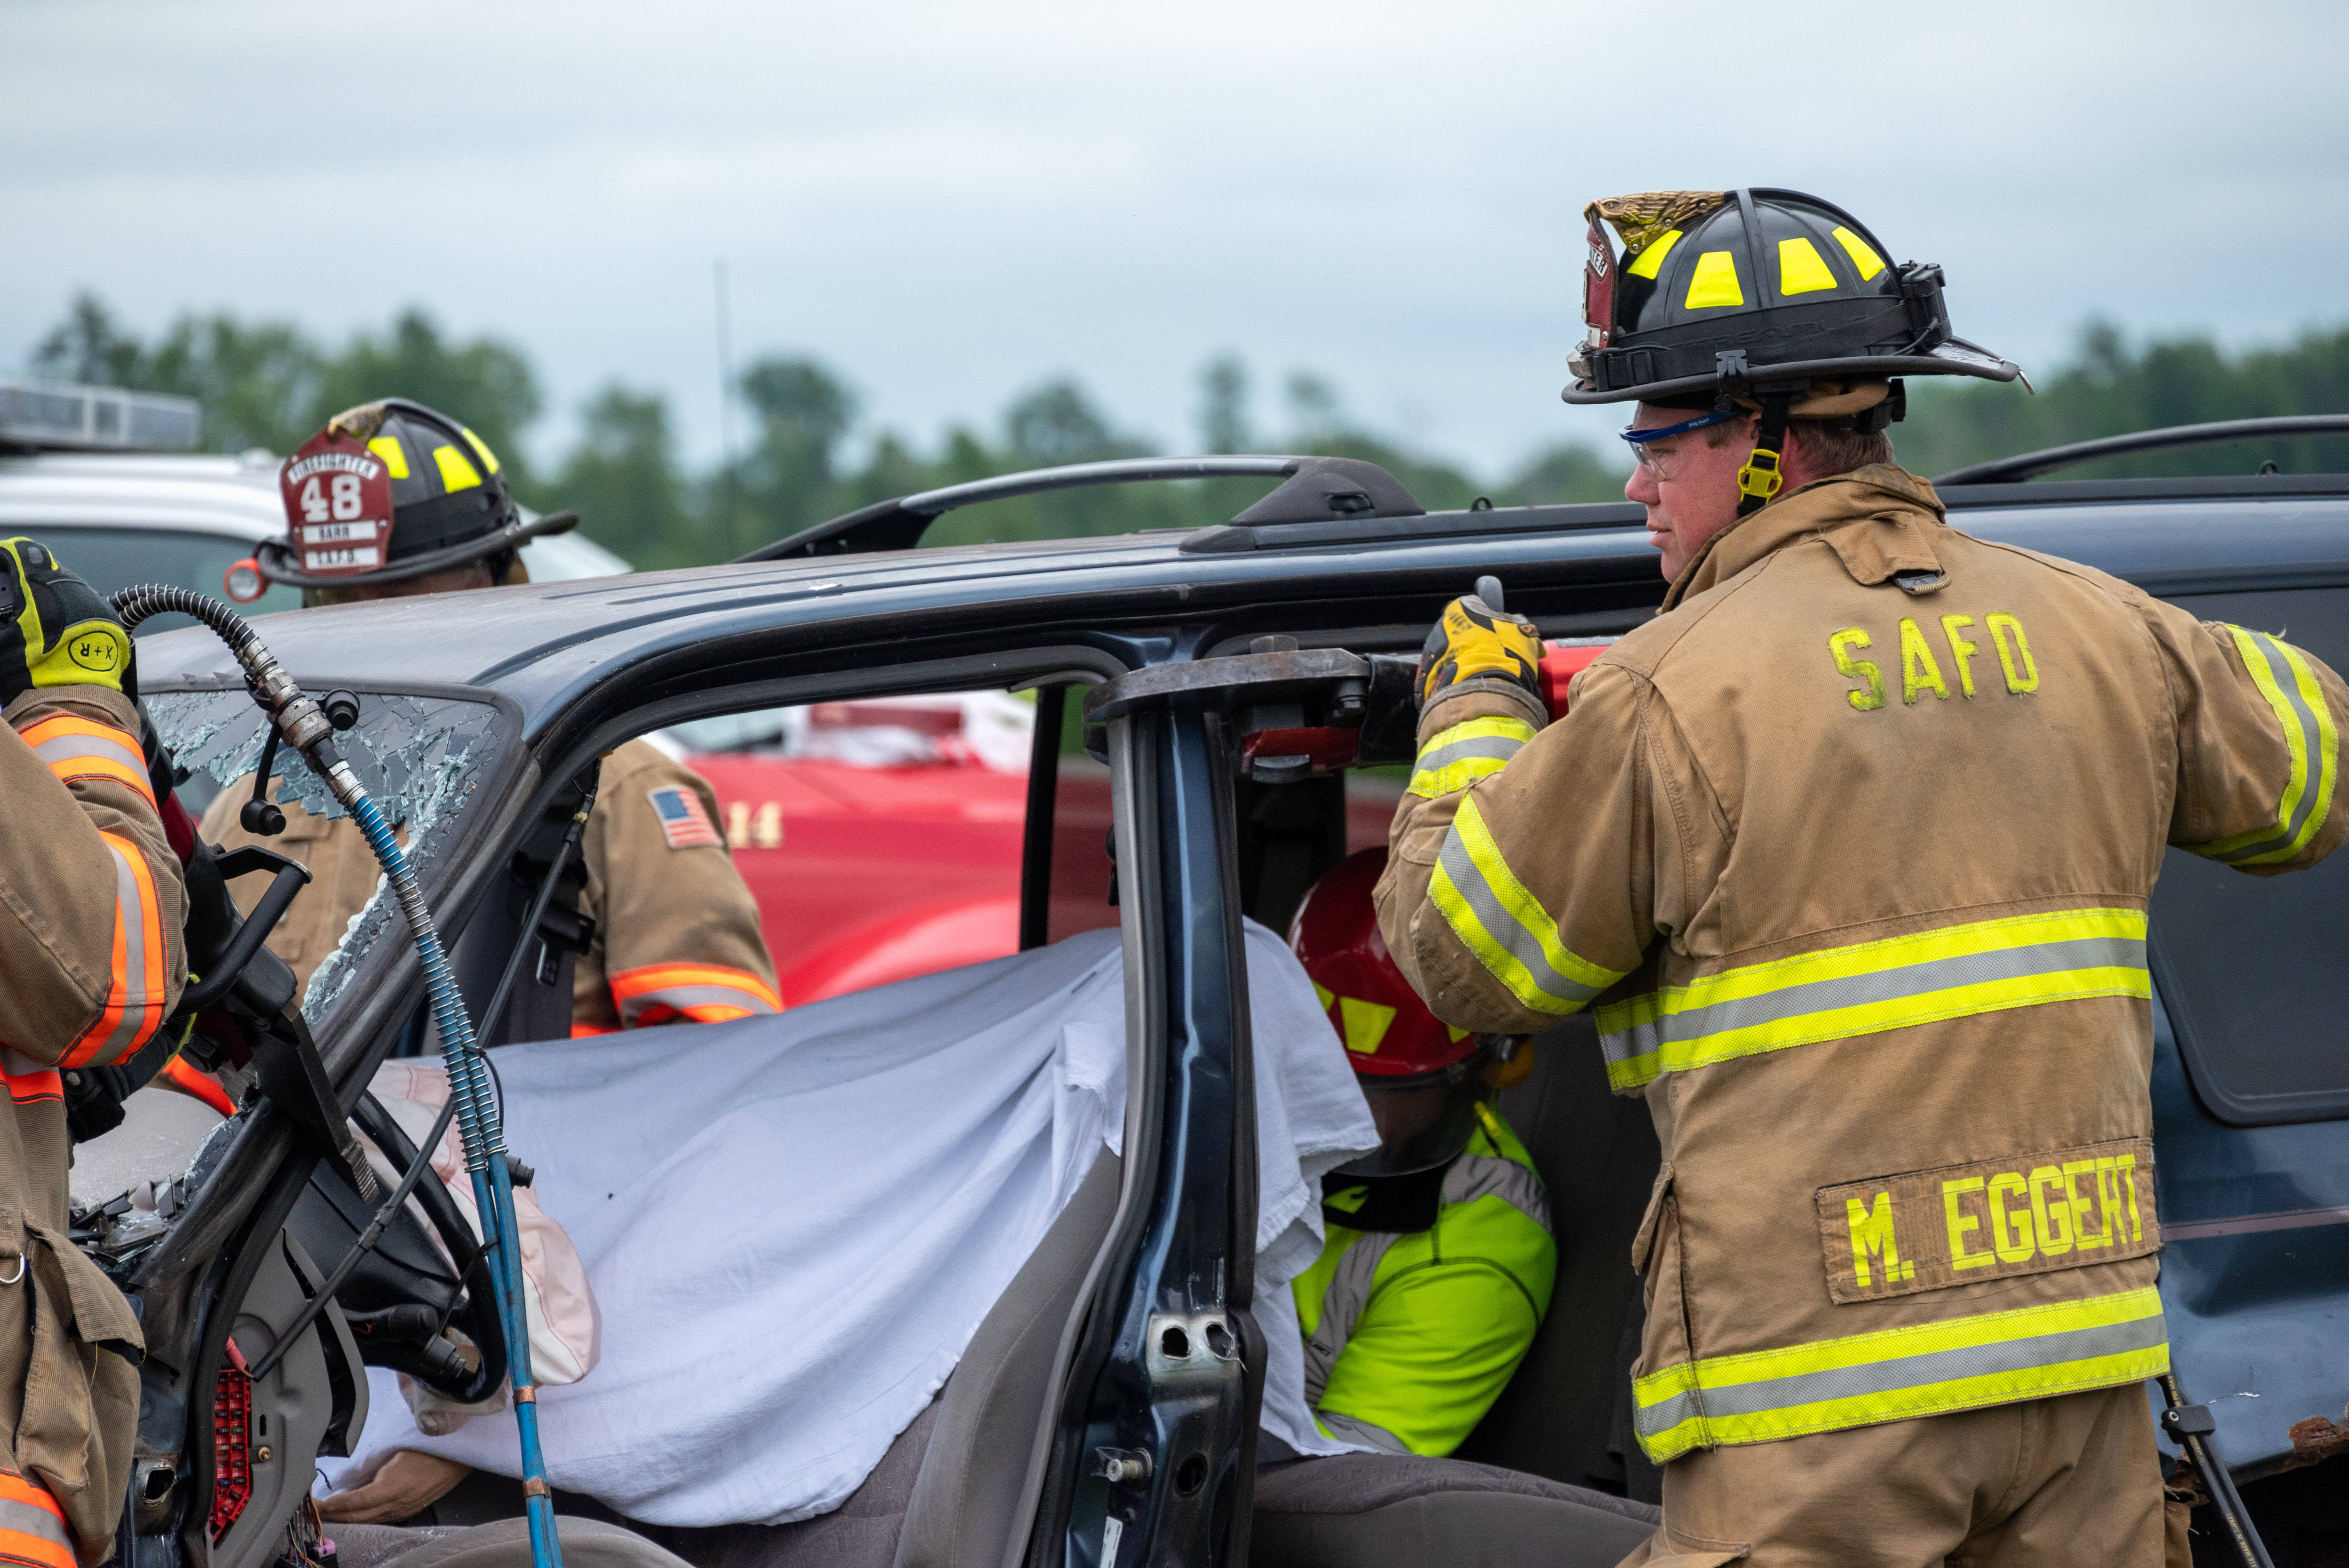 Firefighters At Car Accident Wallpaper